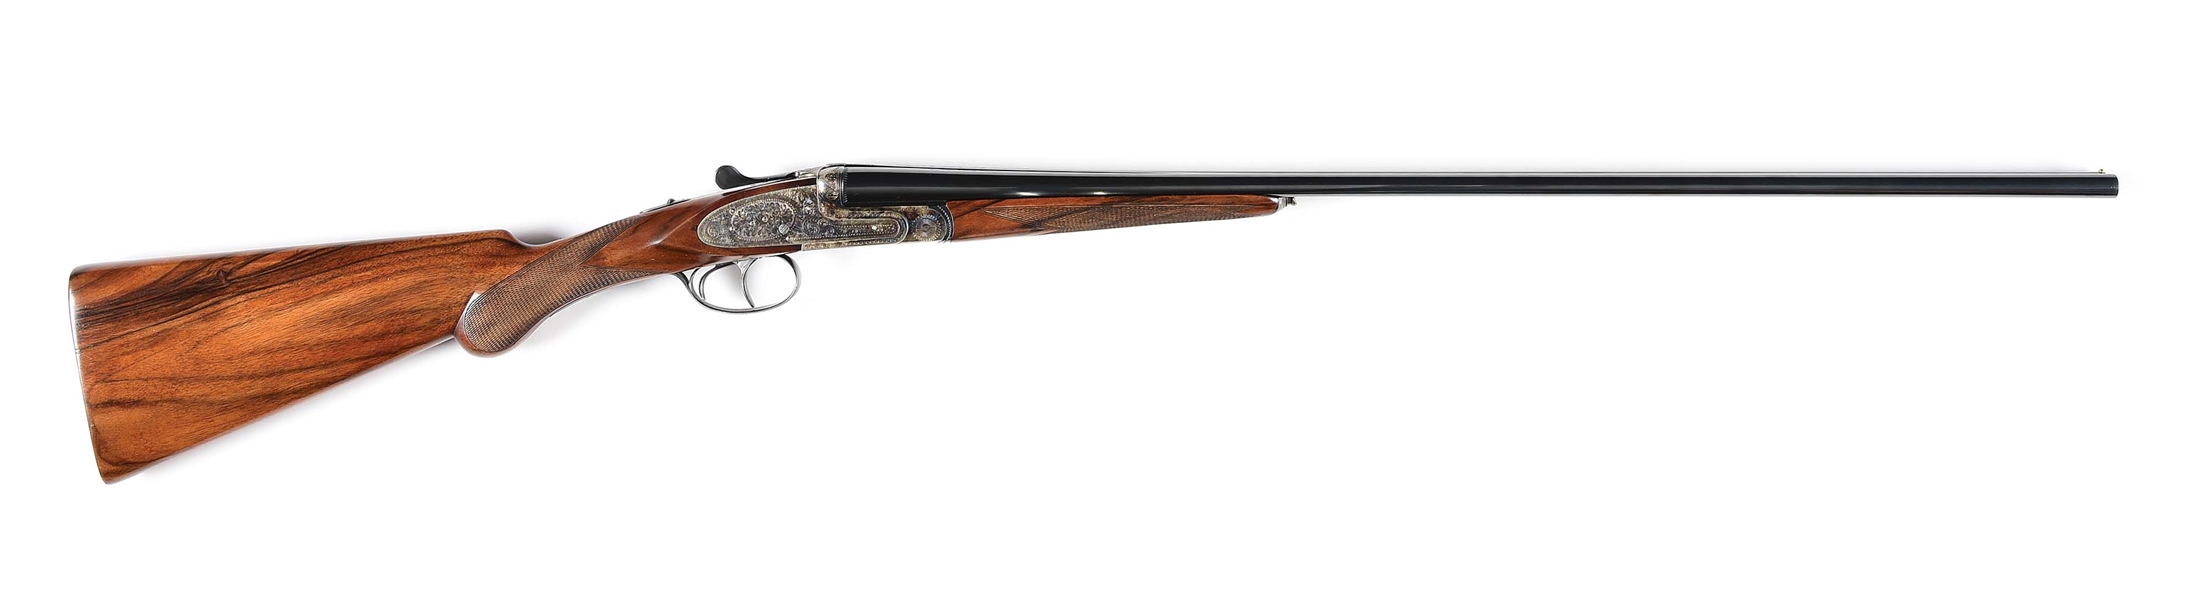 (M) FINE AYA "NO. 2" .410 BORE SIDE LOCK SHOTGUN MADE FOR NEW ENGLAND ARMS.